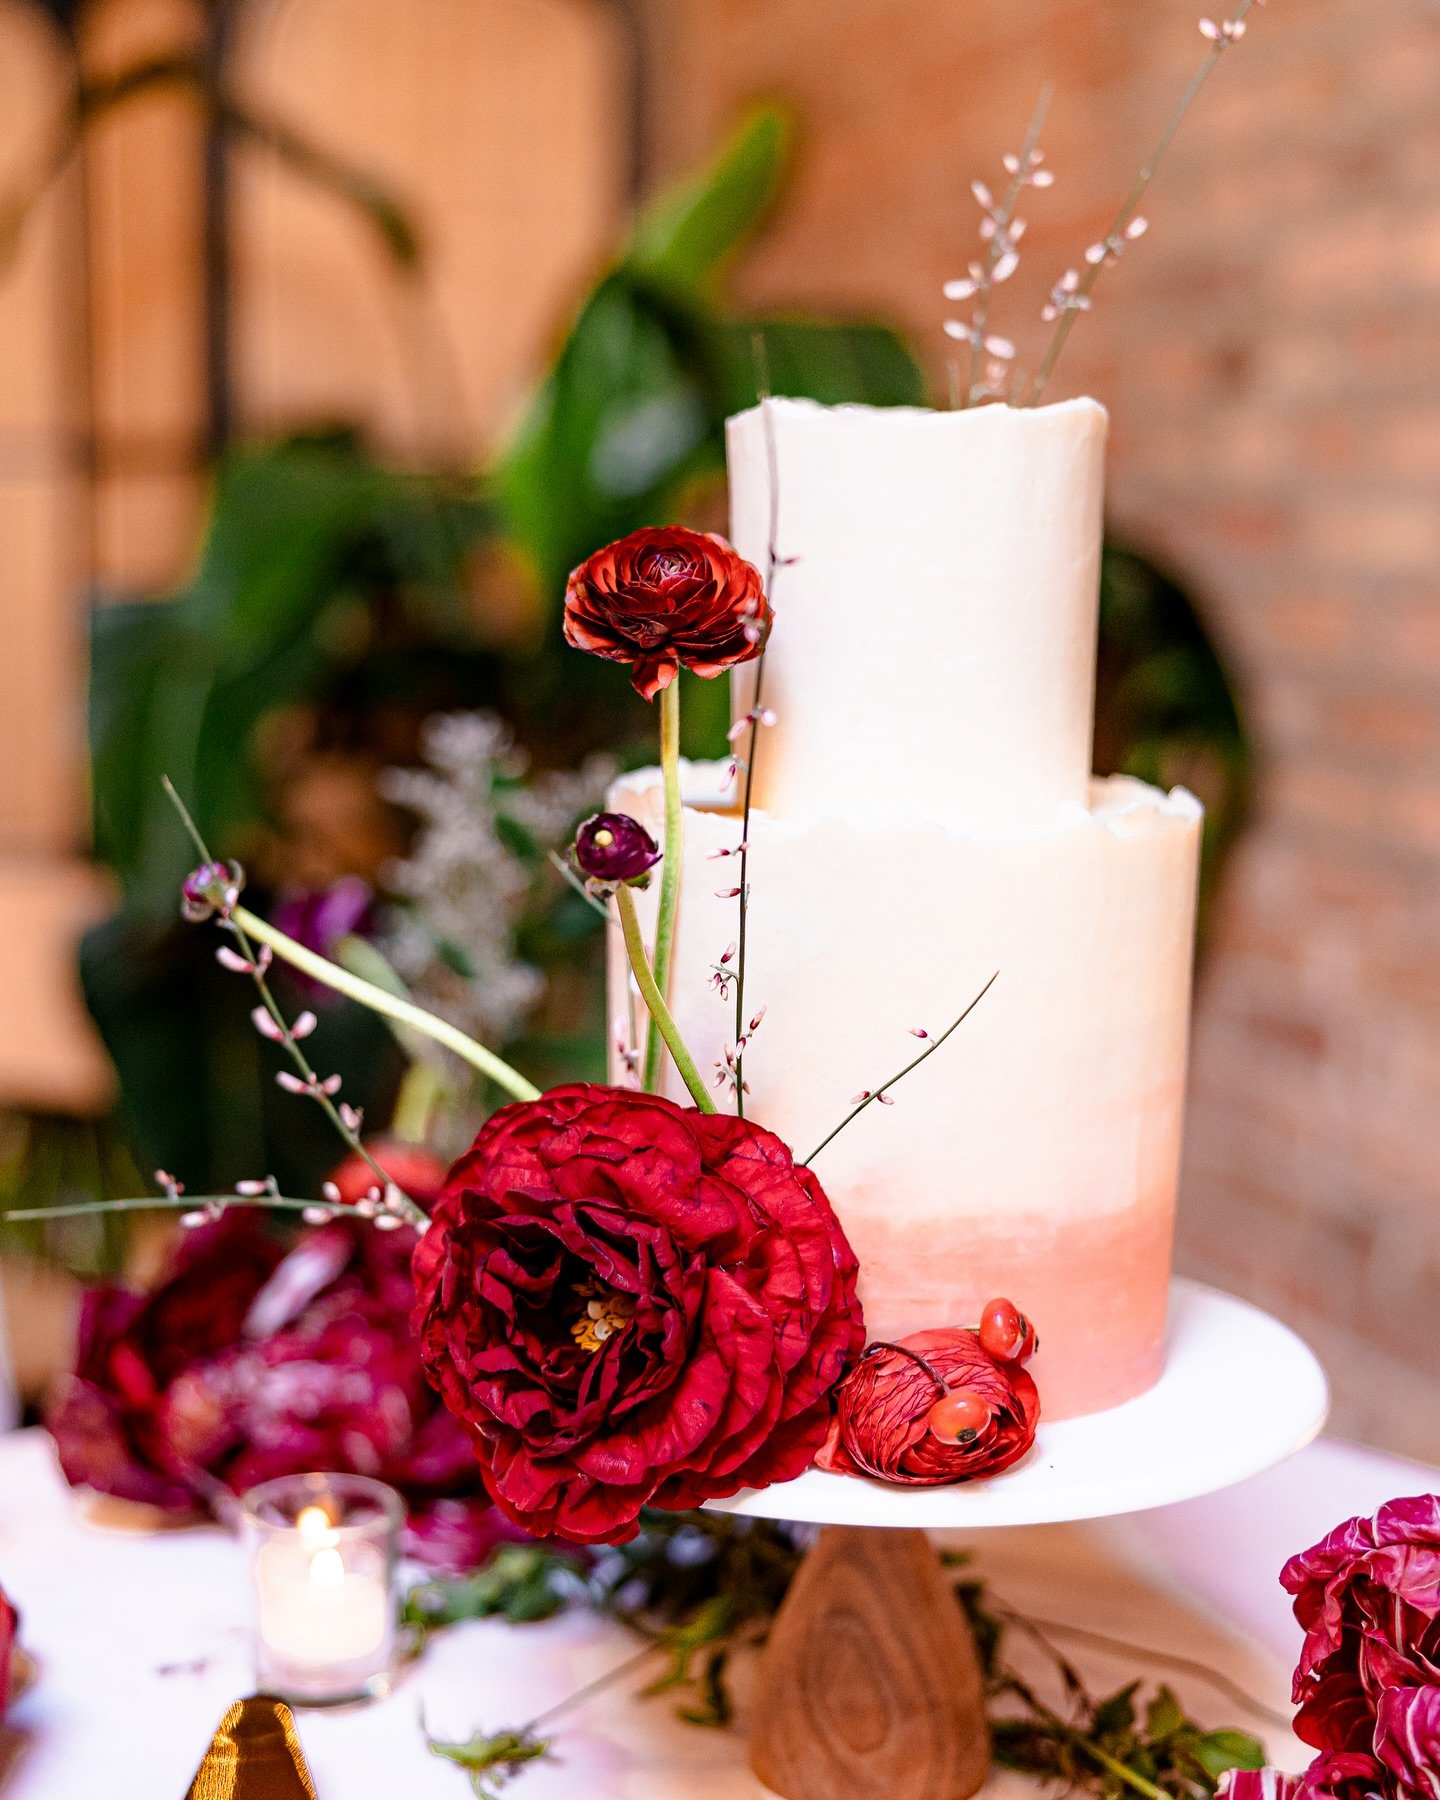 Did you know that when you book BDP to be your wedding caterer that we can make you the cake of your dreams? 🍰✨

Our pastry chef, Hannah, not only makes delicious cakes, but she&rsquo;s also a talented decorator!🌹 Pictured is the beautiful cake tha